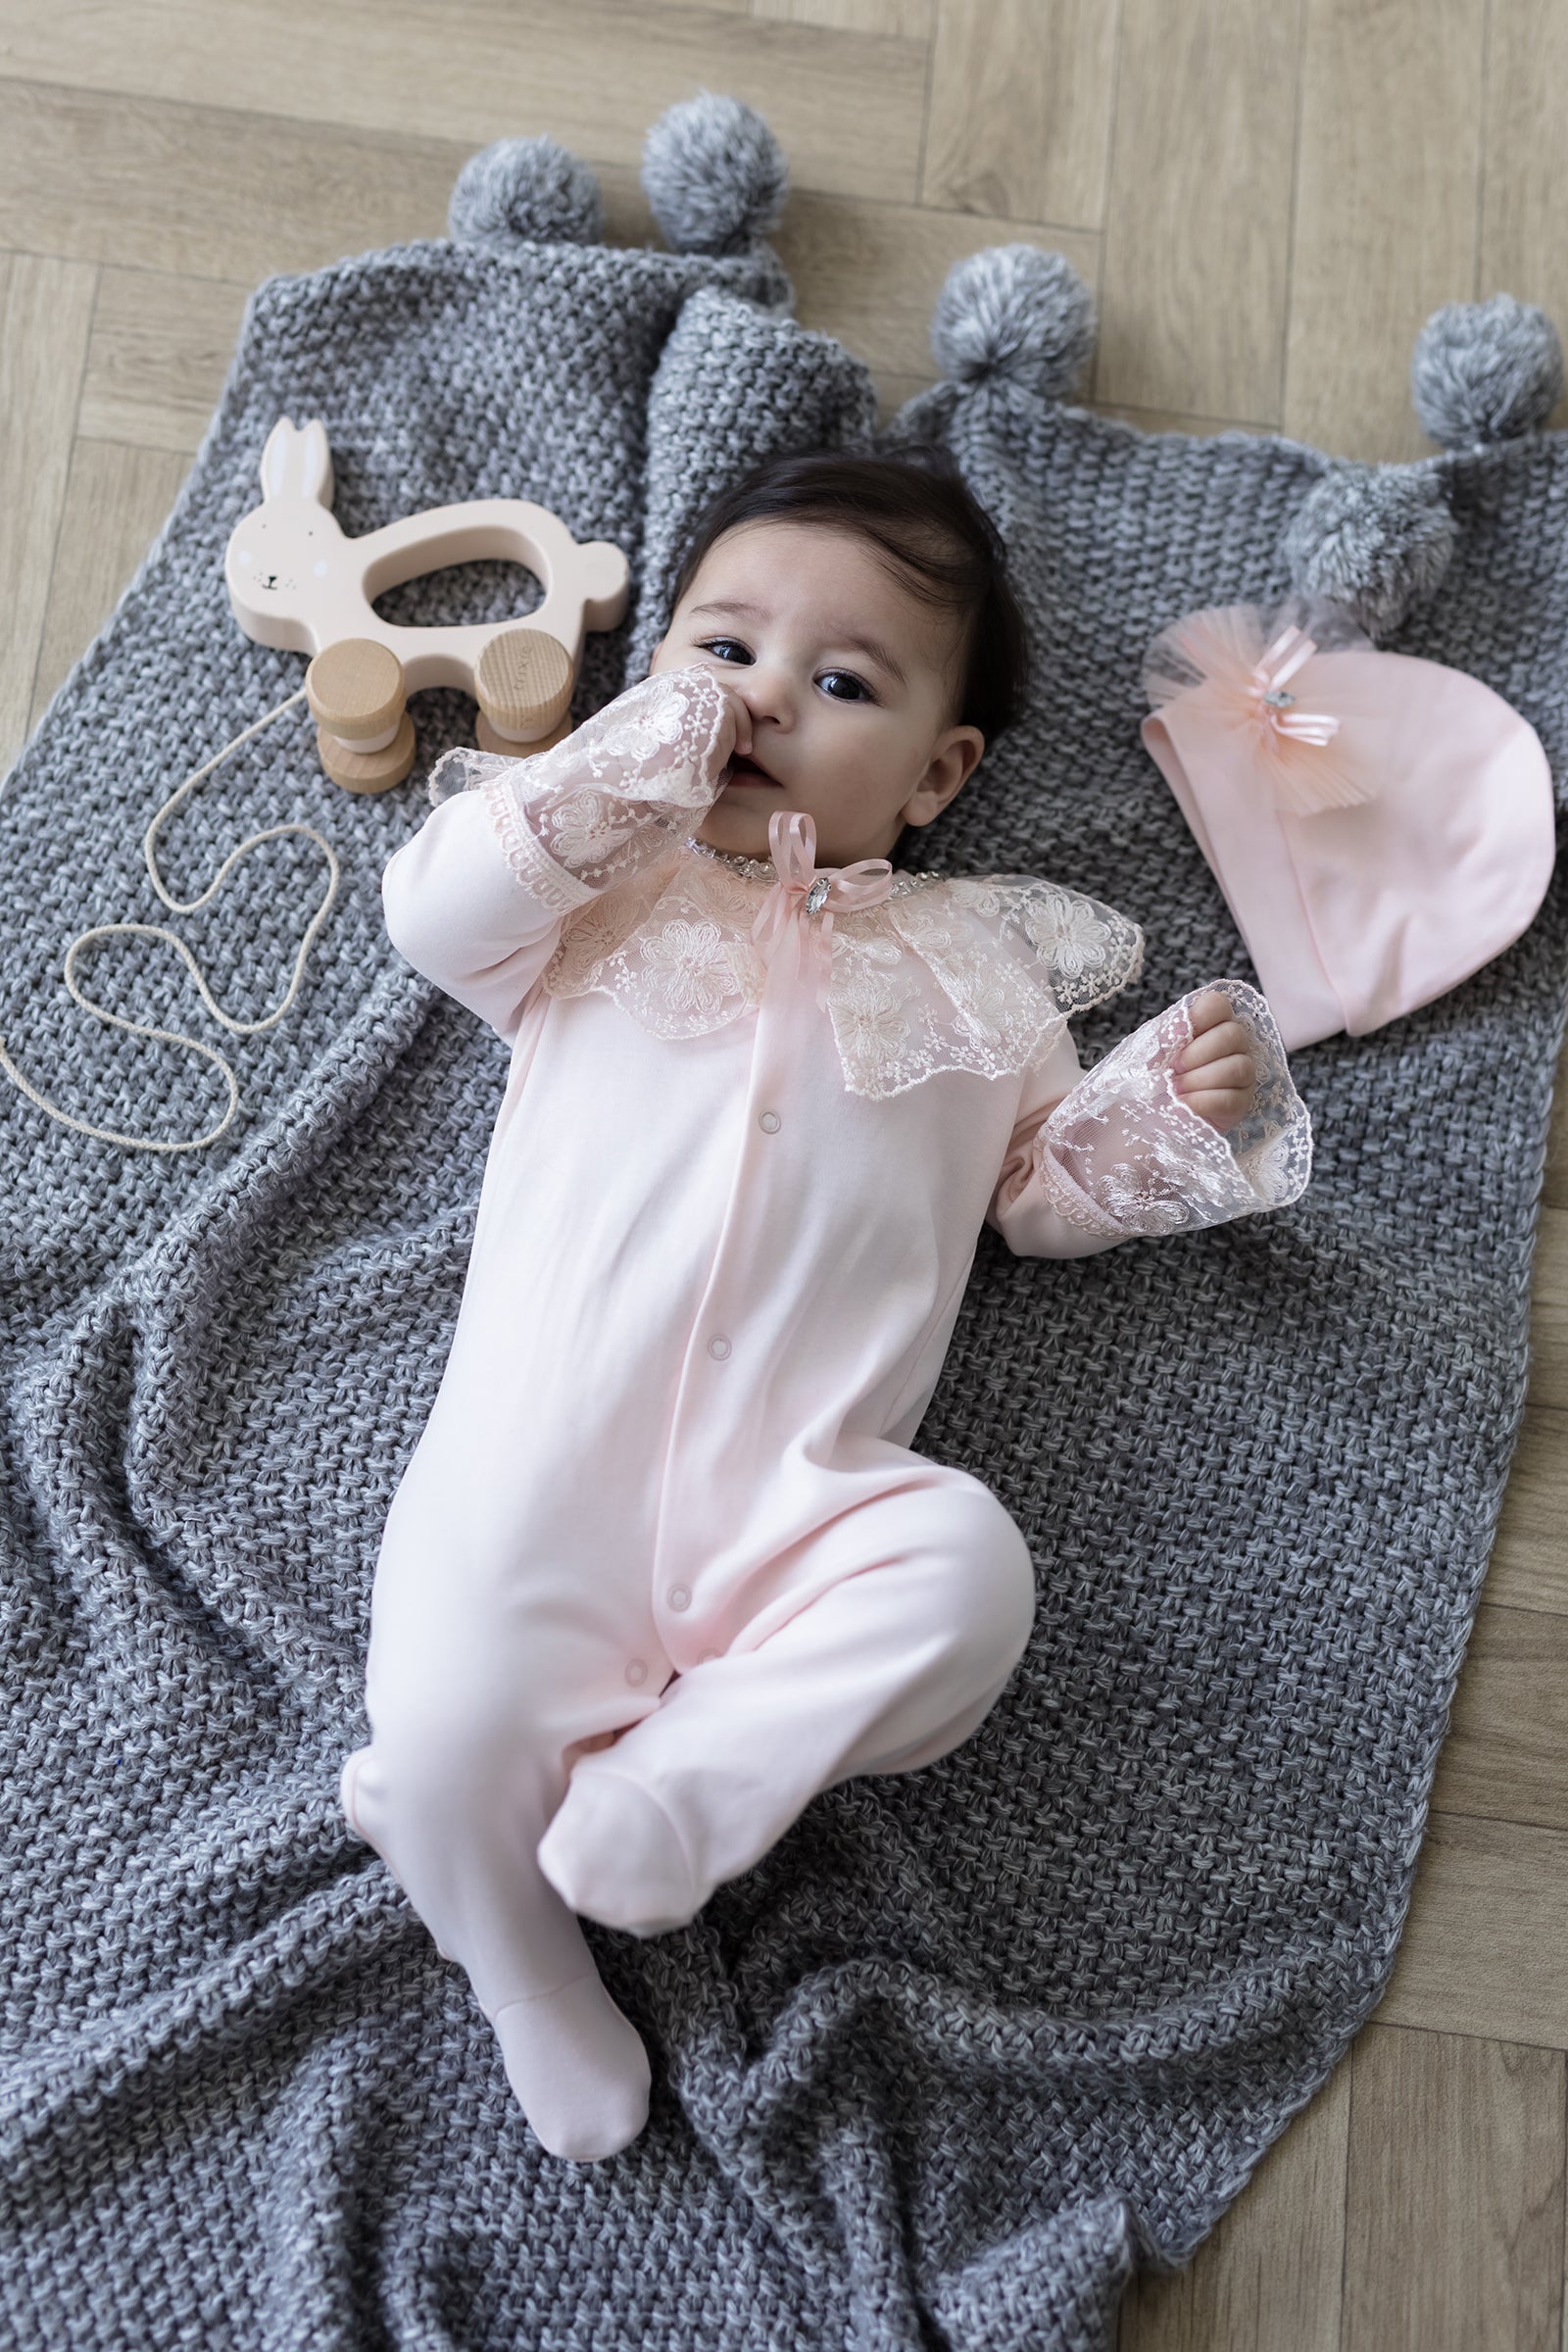 A Perfect Day Onesie Set